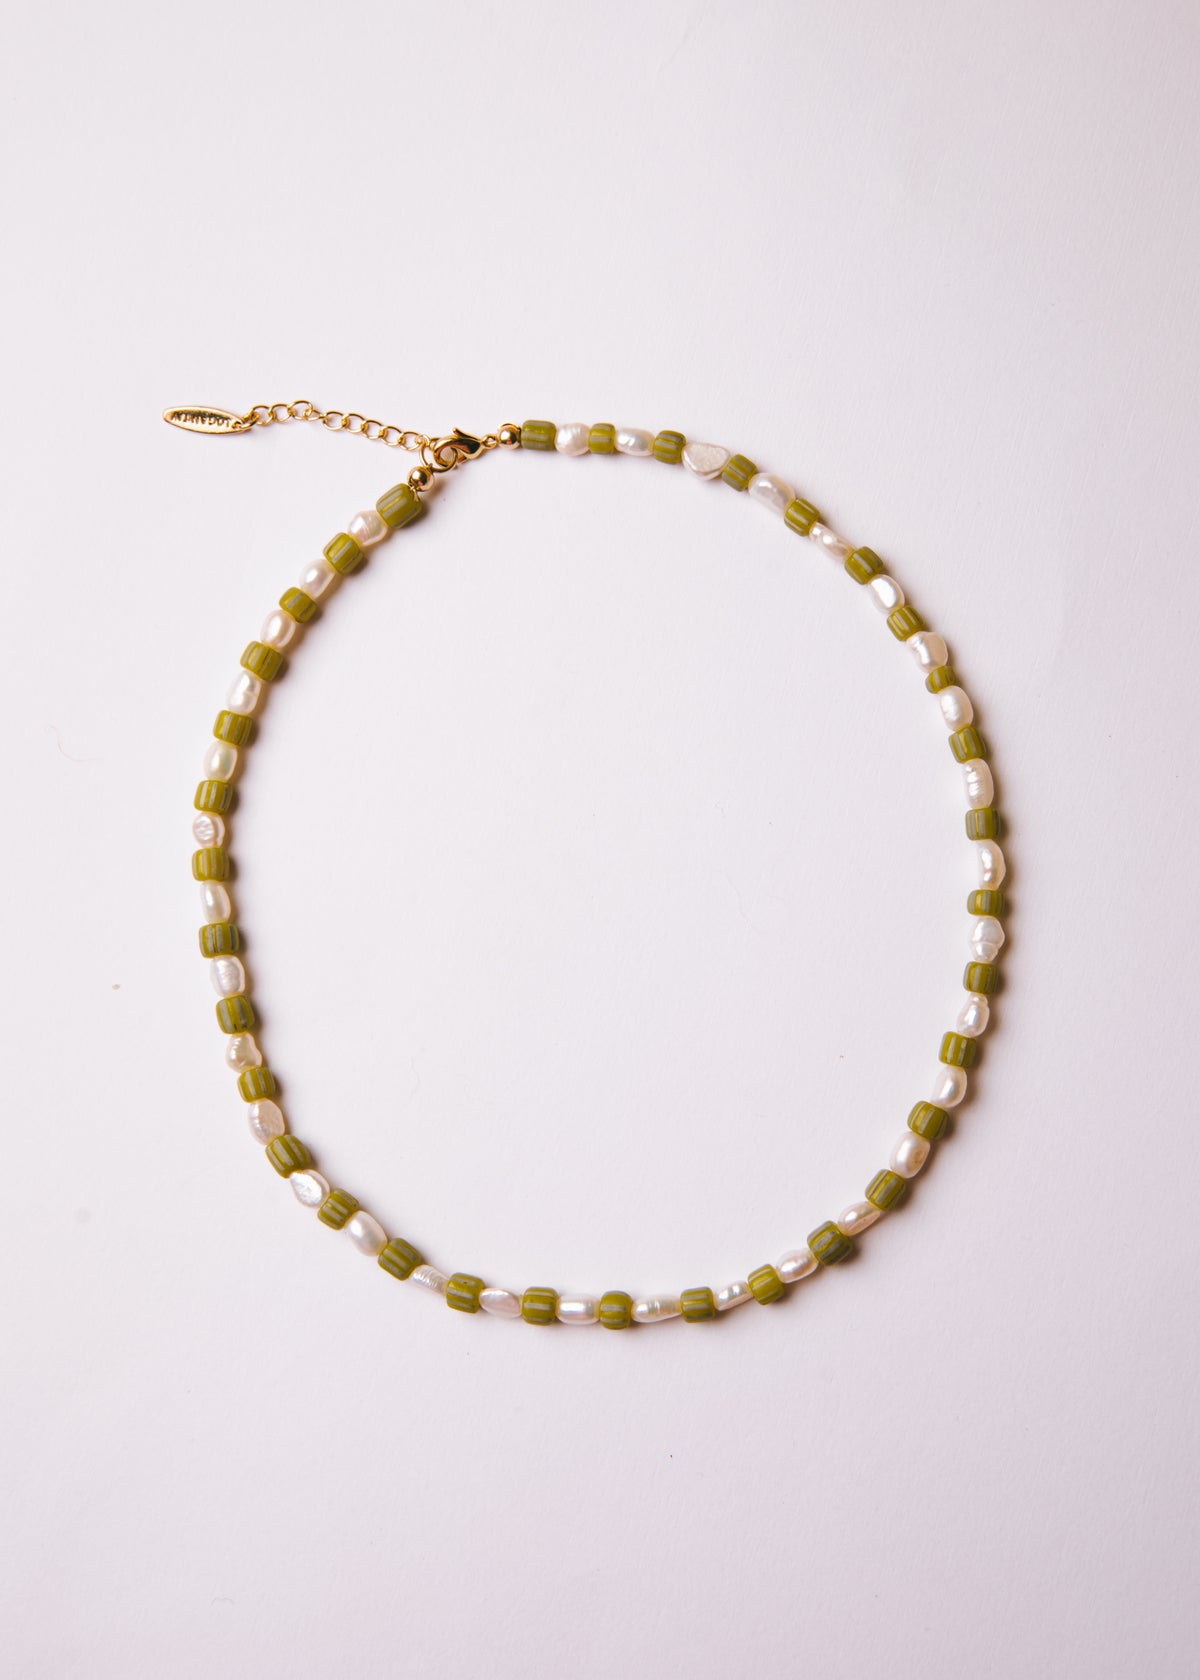 Green Striped Necklace